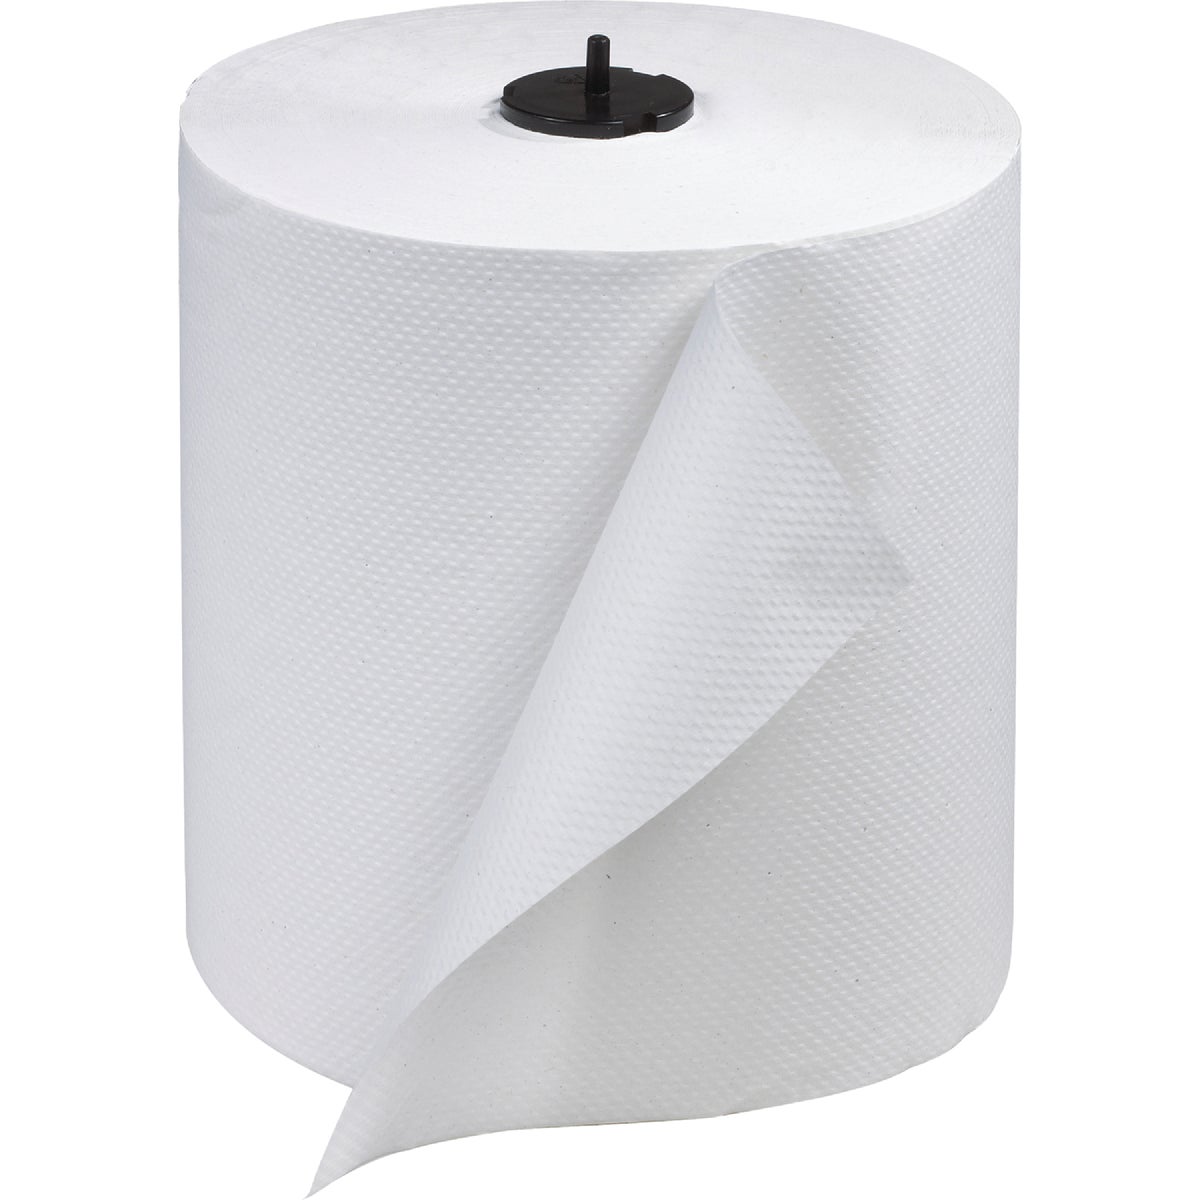 Item 600561, Tork Advanced roll towels are embossed to enhance feel and maximize 